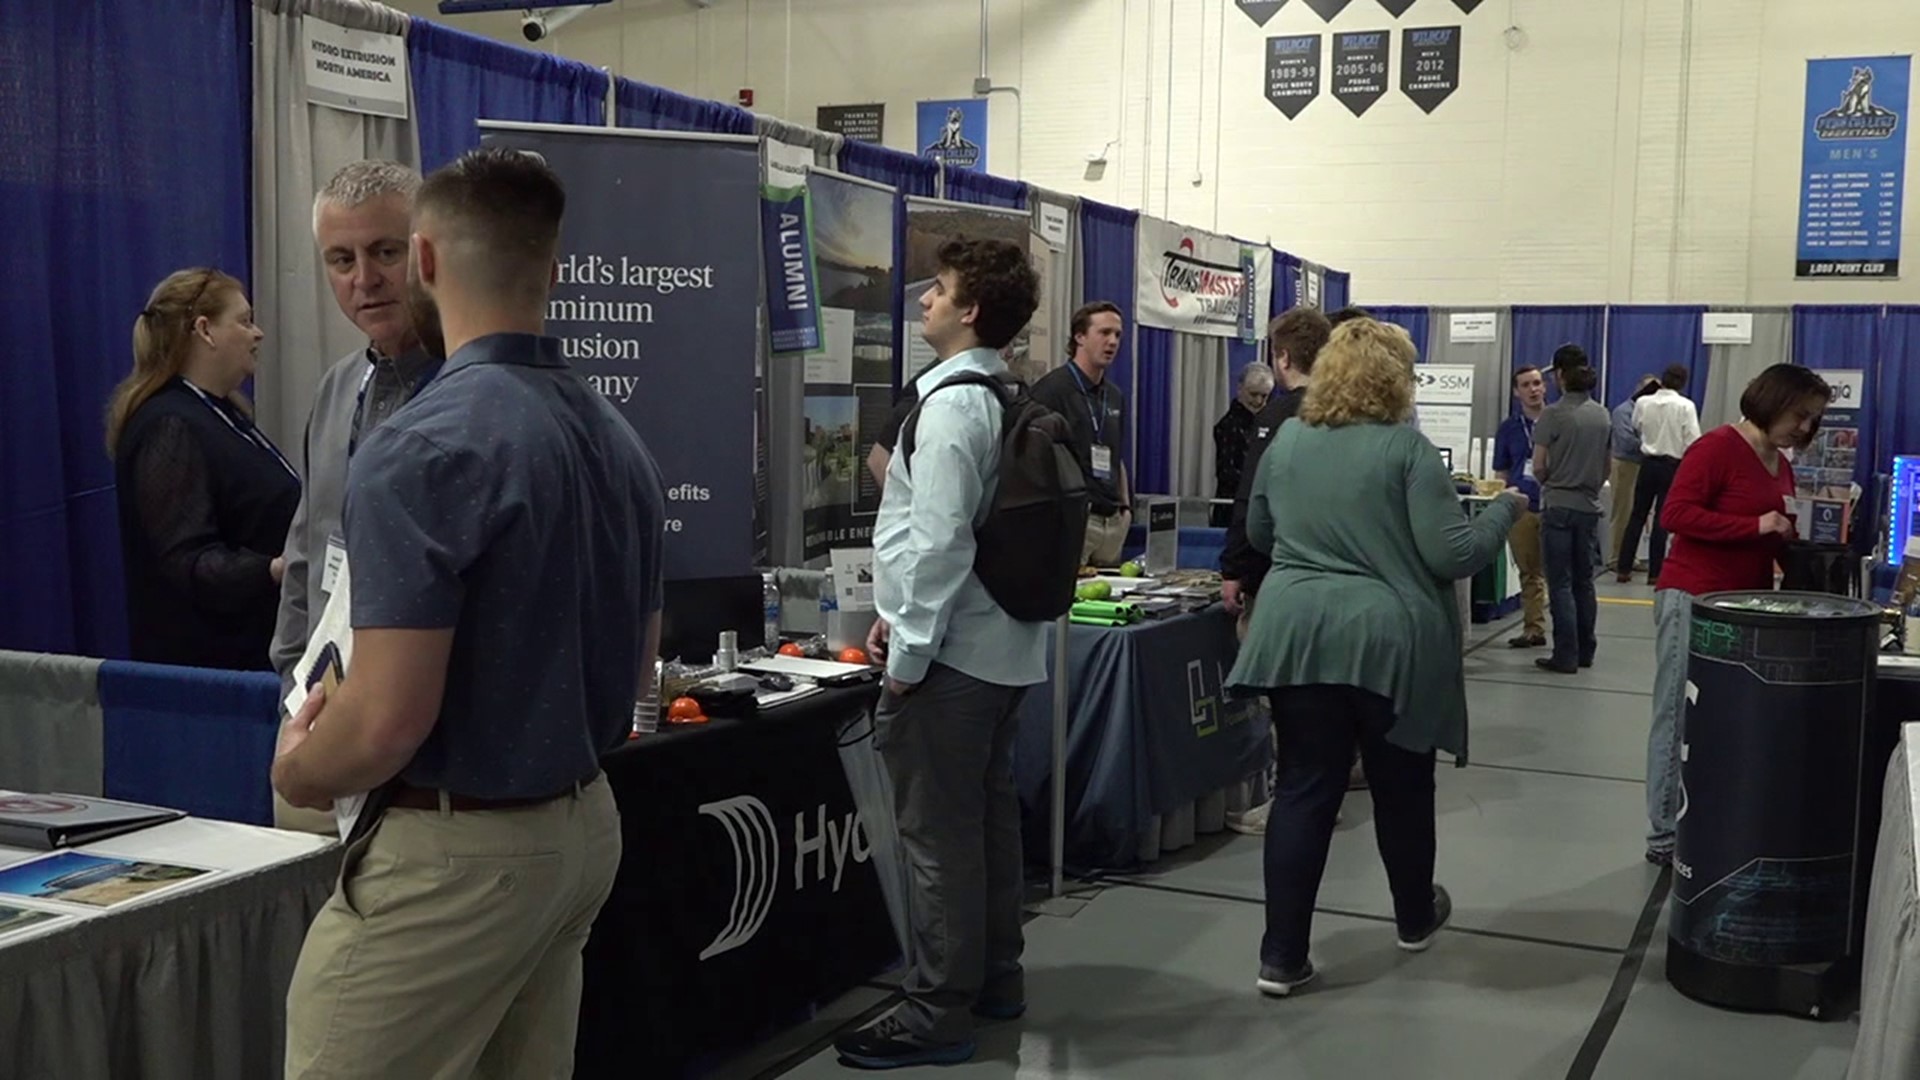 Pennsylvania College of Technology students had the opportunity to speak with potential employers. Newswatch 16's Mackenzie Aucker stopped by the job fair.